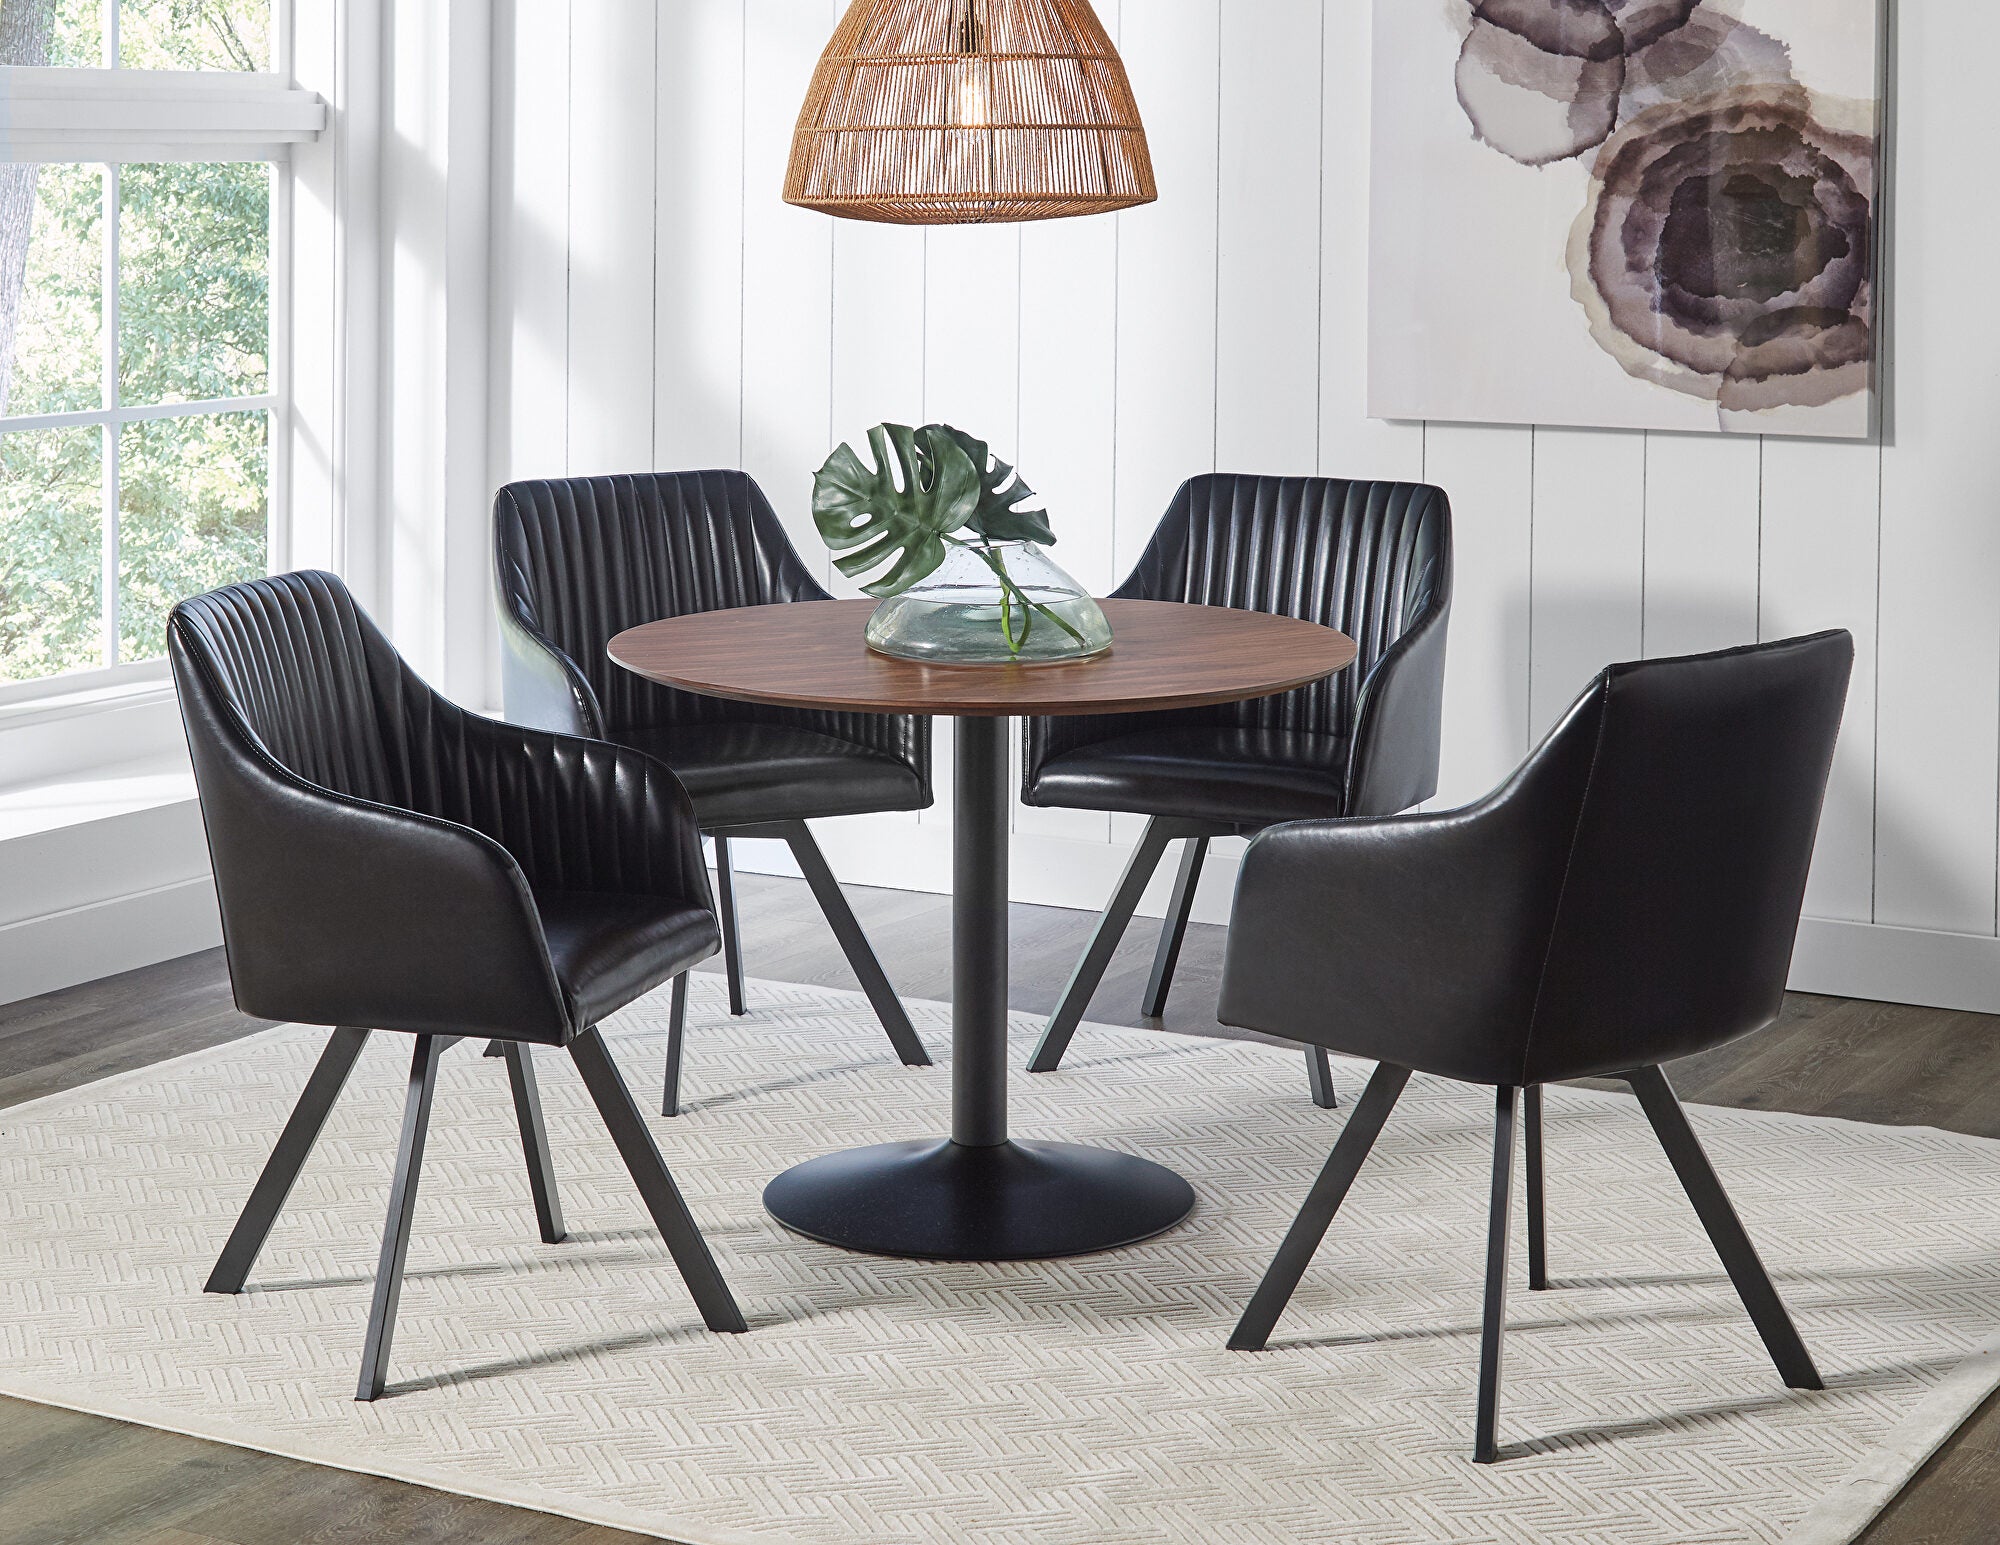 Lana Round Dining Table- Click for Price Drop